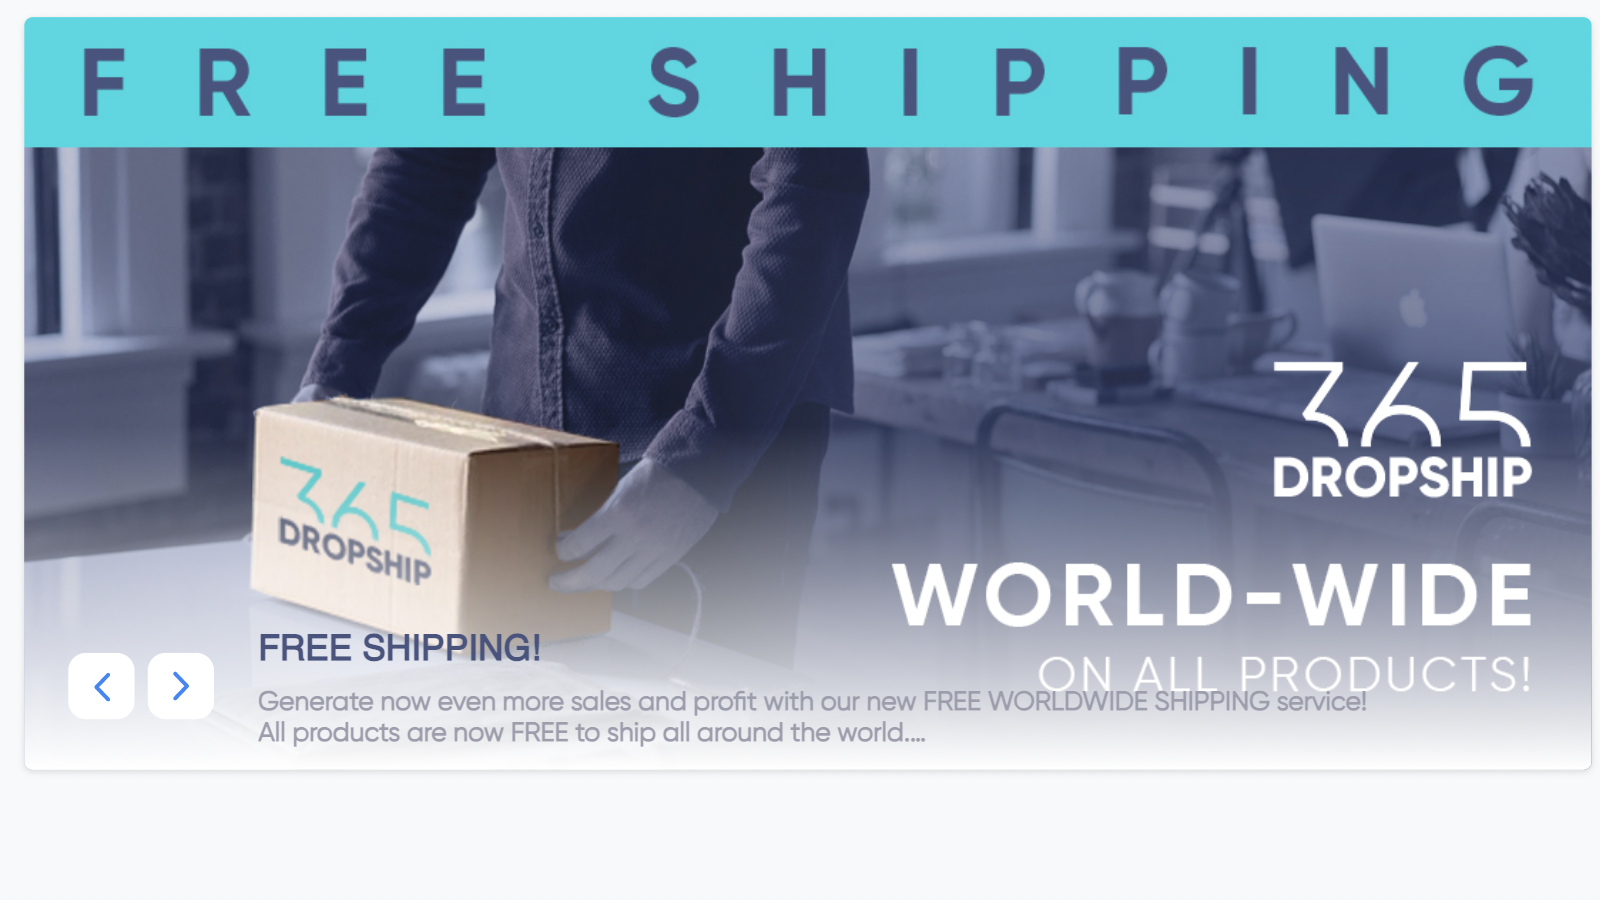 World-Wide Shipping for all Products